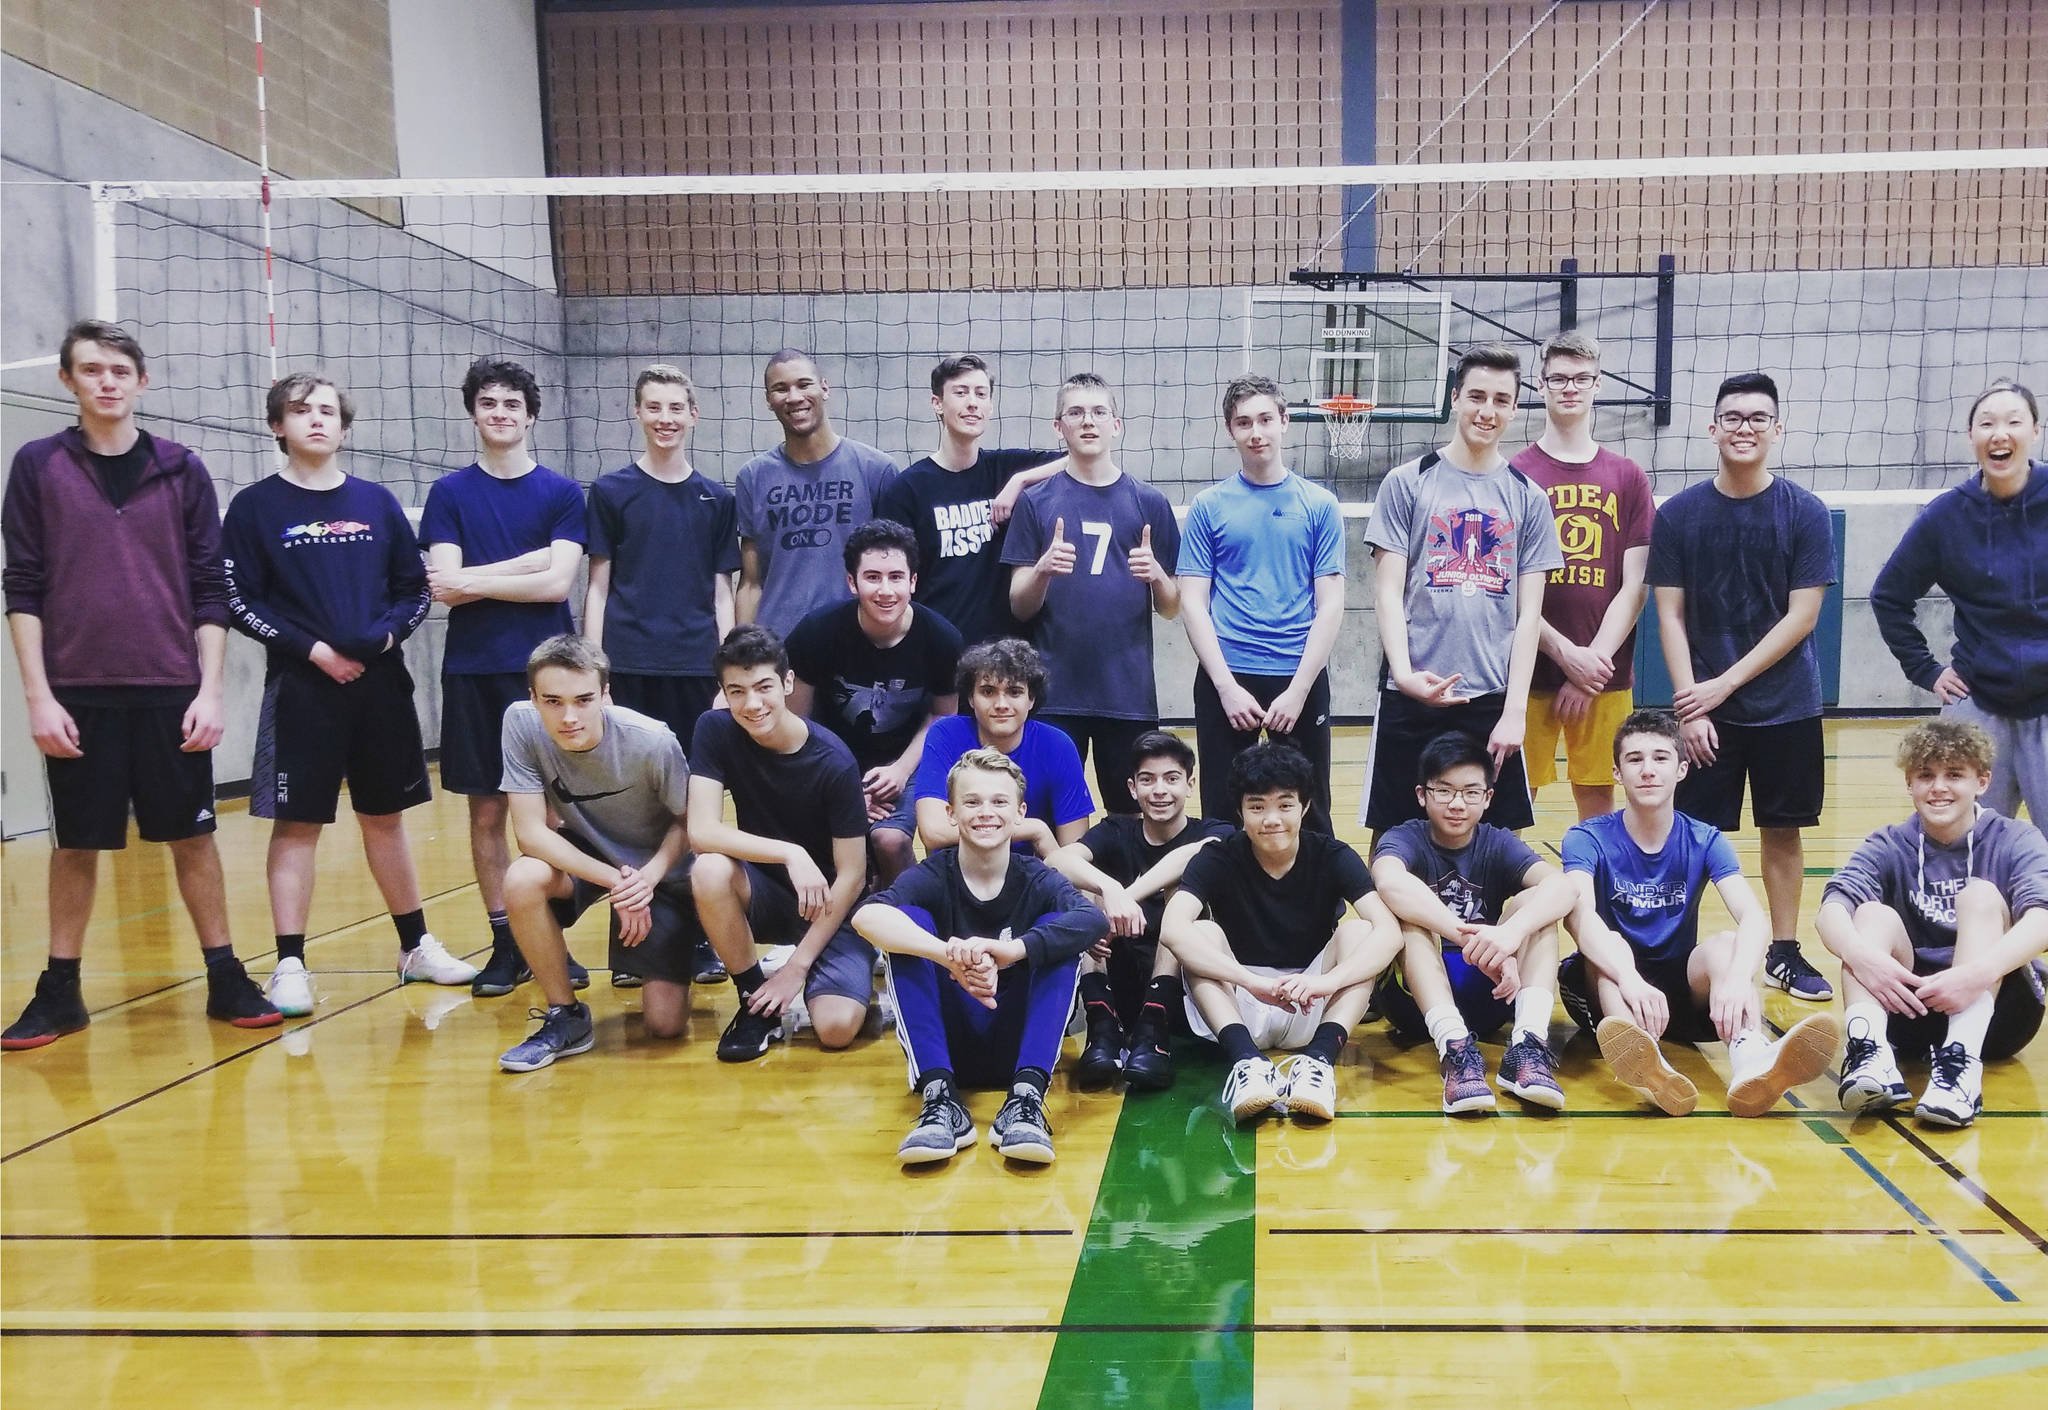 The Absolute Zero Volleyball Club on Mercer Island (pictured) will be hosting a Five12 Western Boys Power League volleyball tournament March 14-15 on the Island. Photo courtesy of Billie Hwang